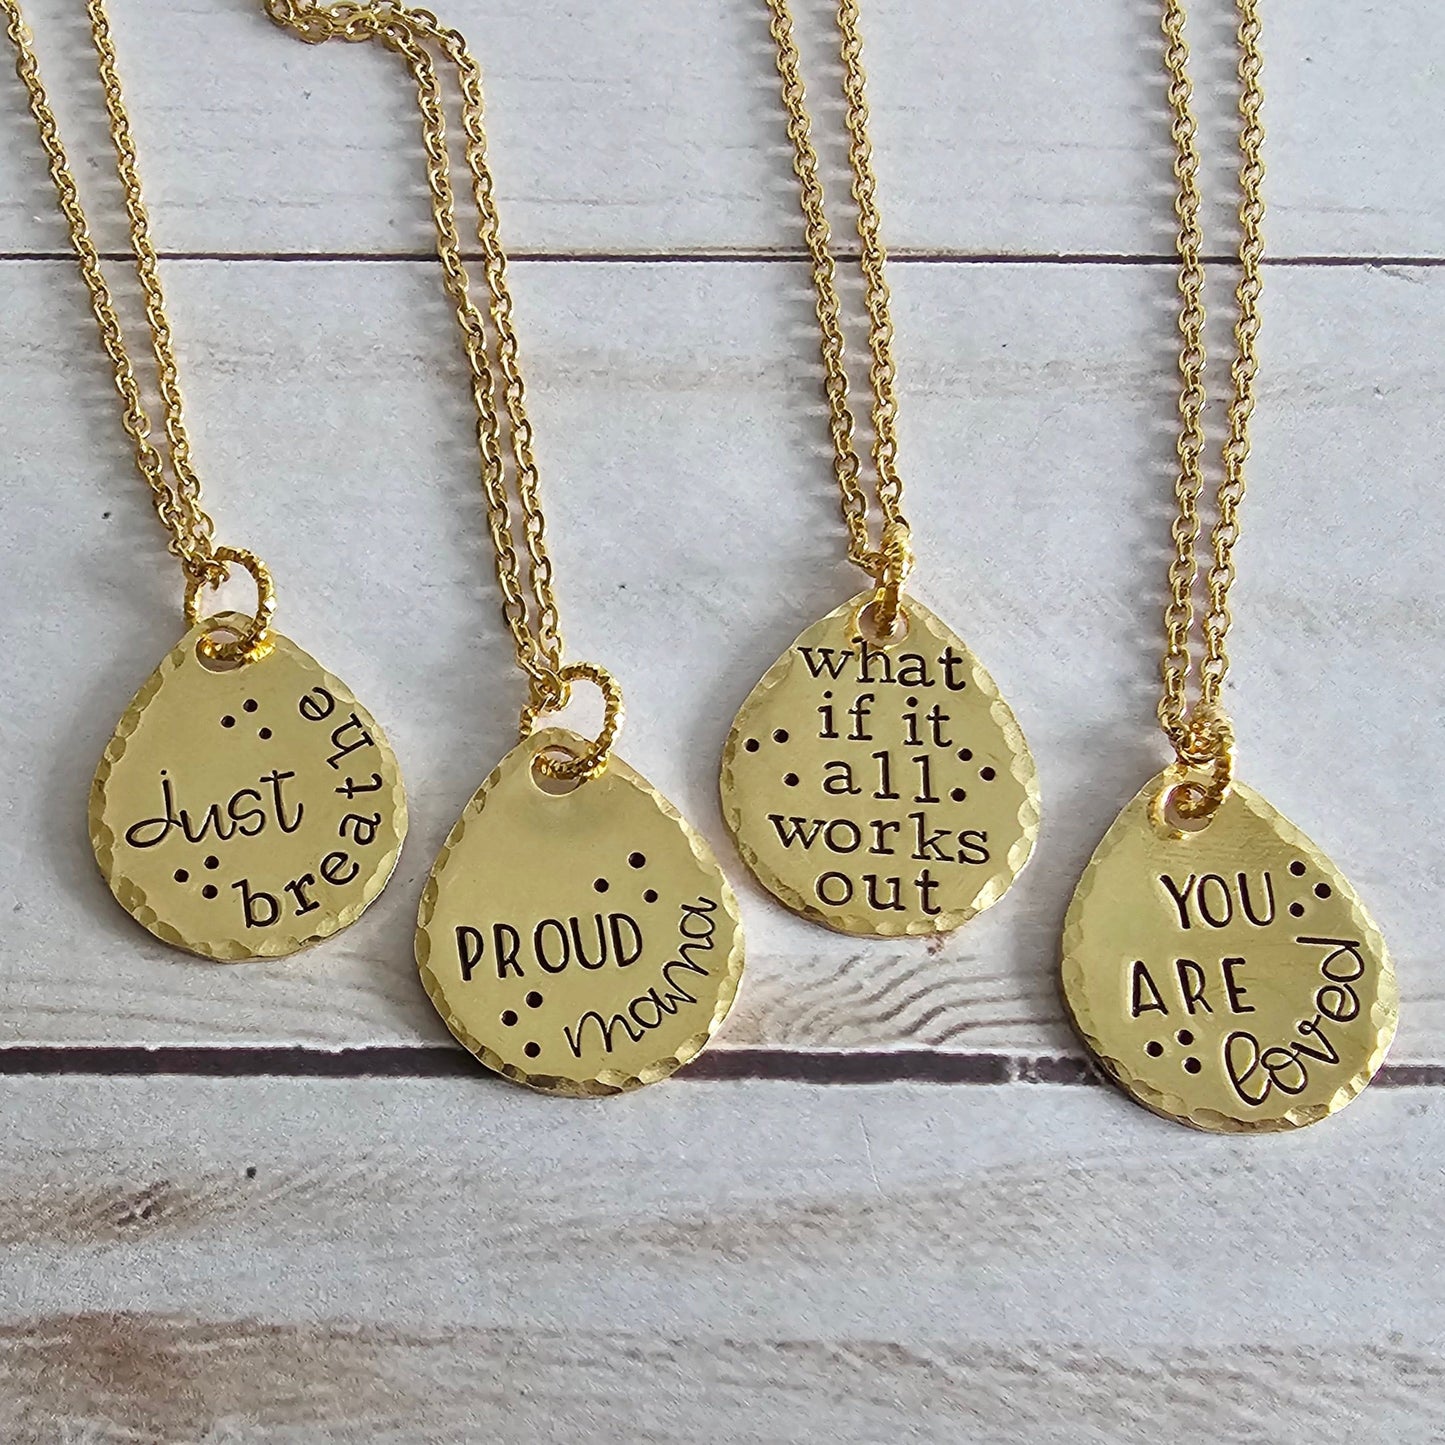 Gold tone drop shaped charm that is hand stamped with different quotes